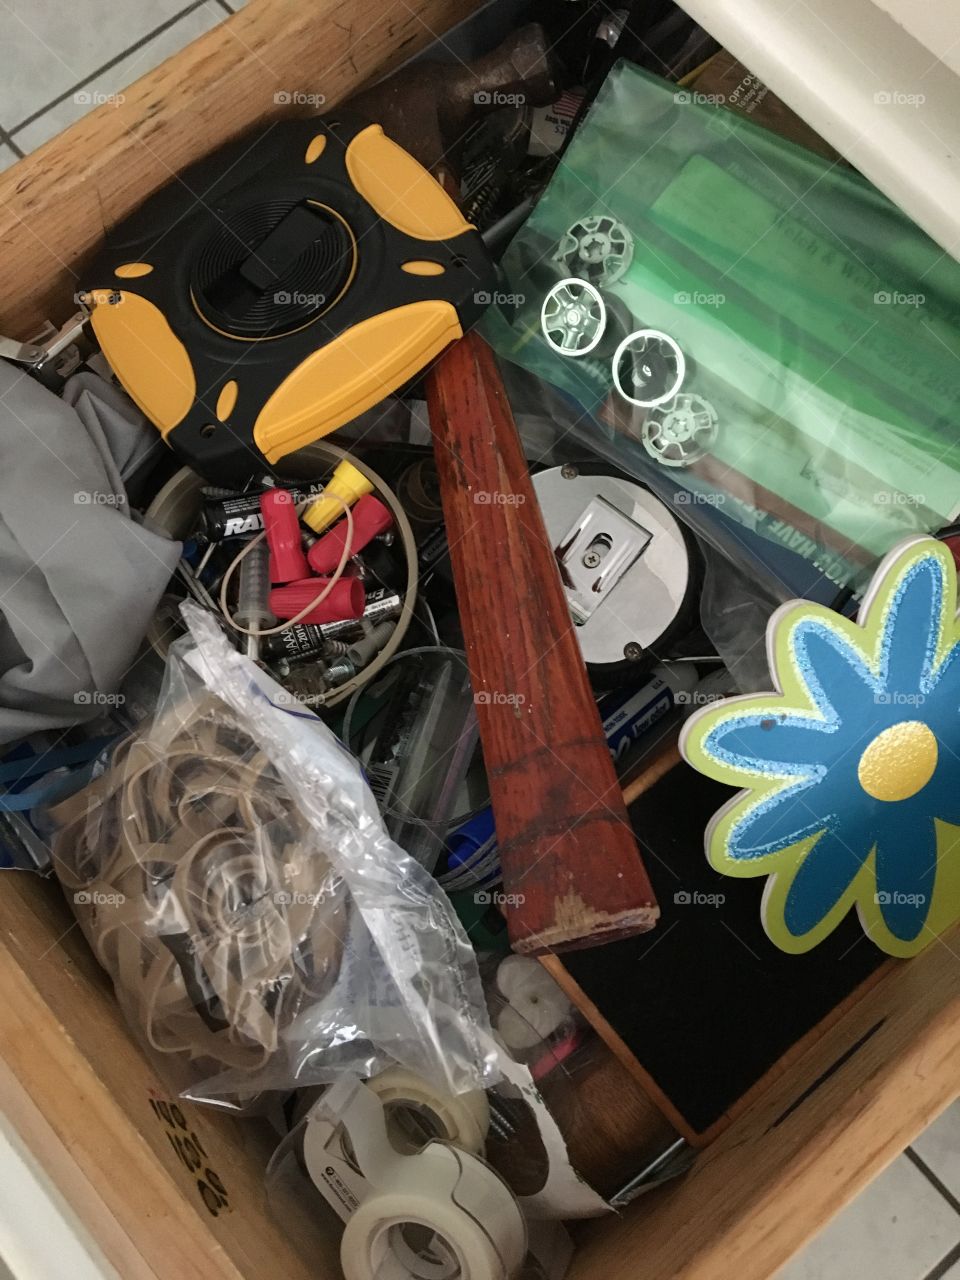 The Junk Drawer